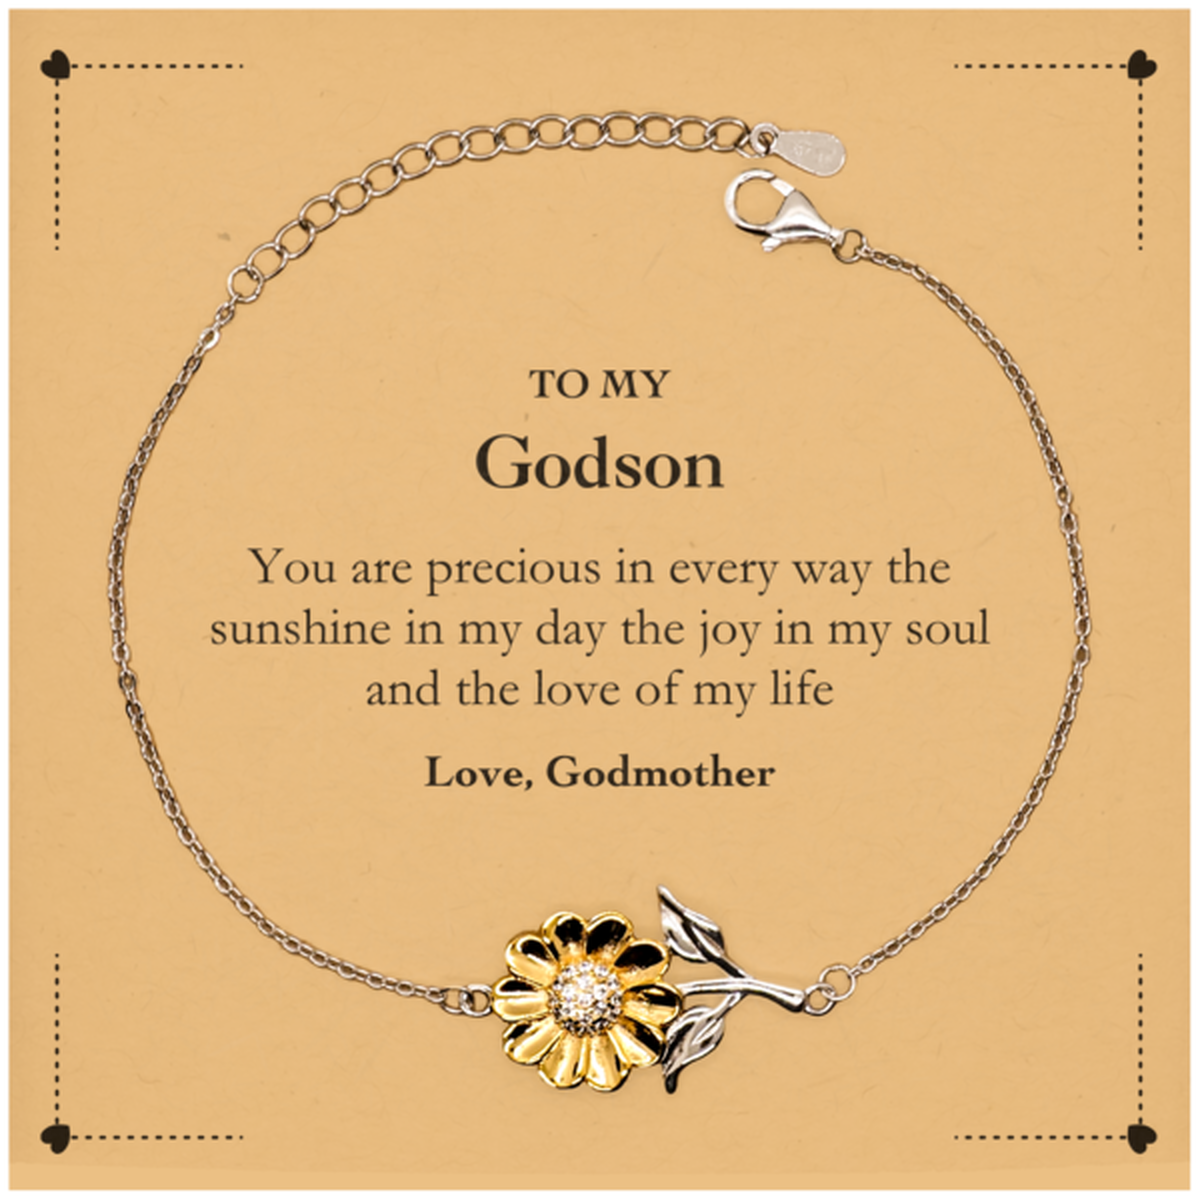 Graduation Gifts for Godson Sunflower Bracelet Present from Godmother, Christmas Godson Birthday Gifts Godson You are precious in every way the sunshine in my day. Love, Godmother